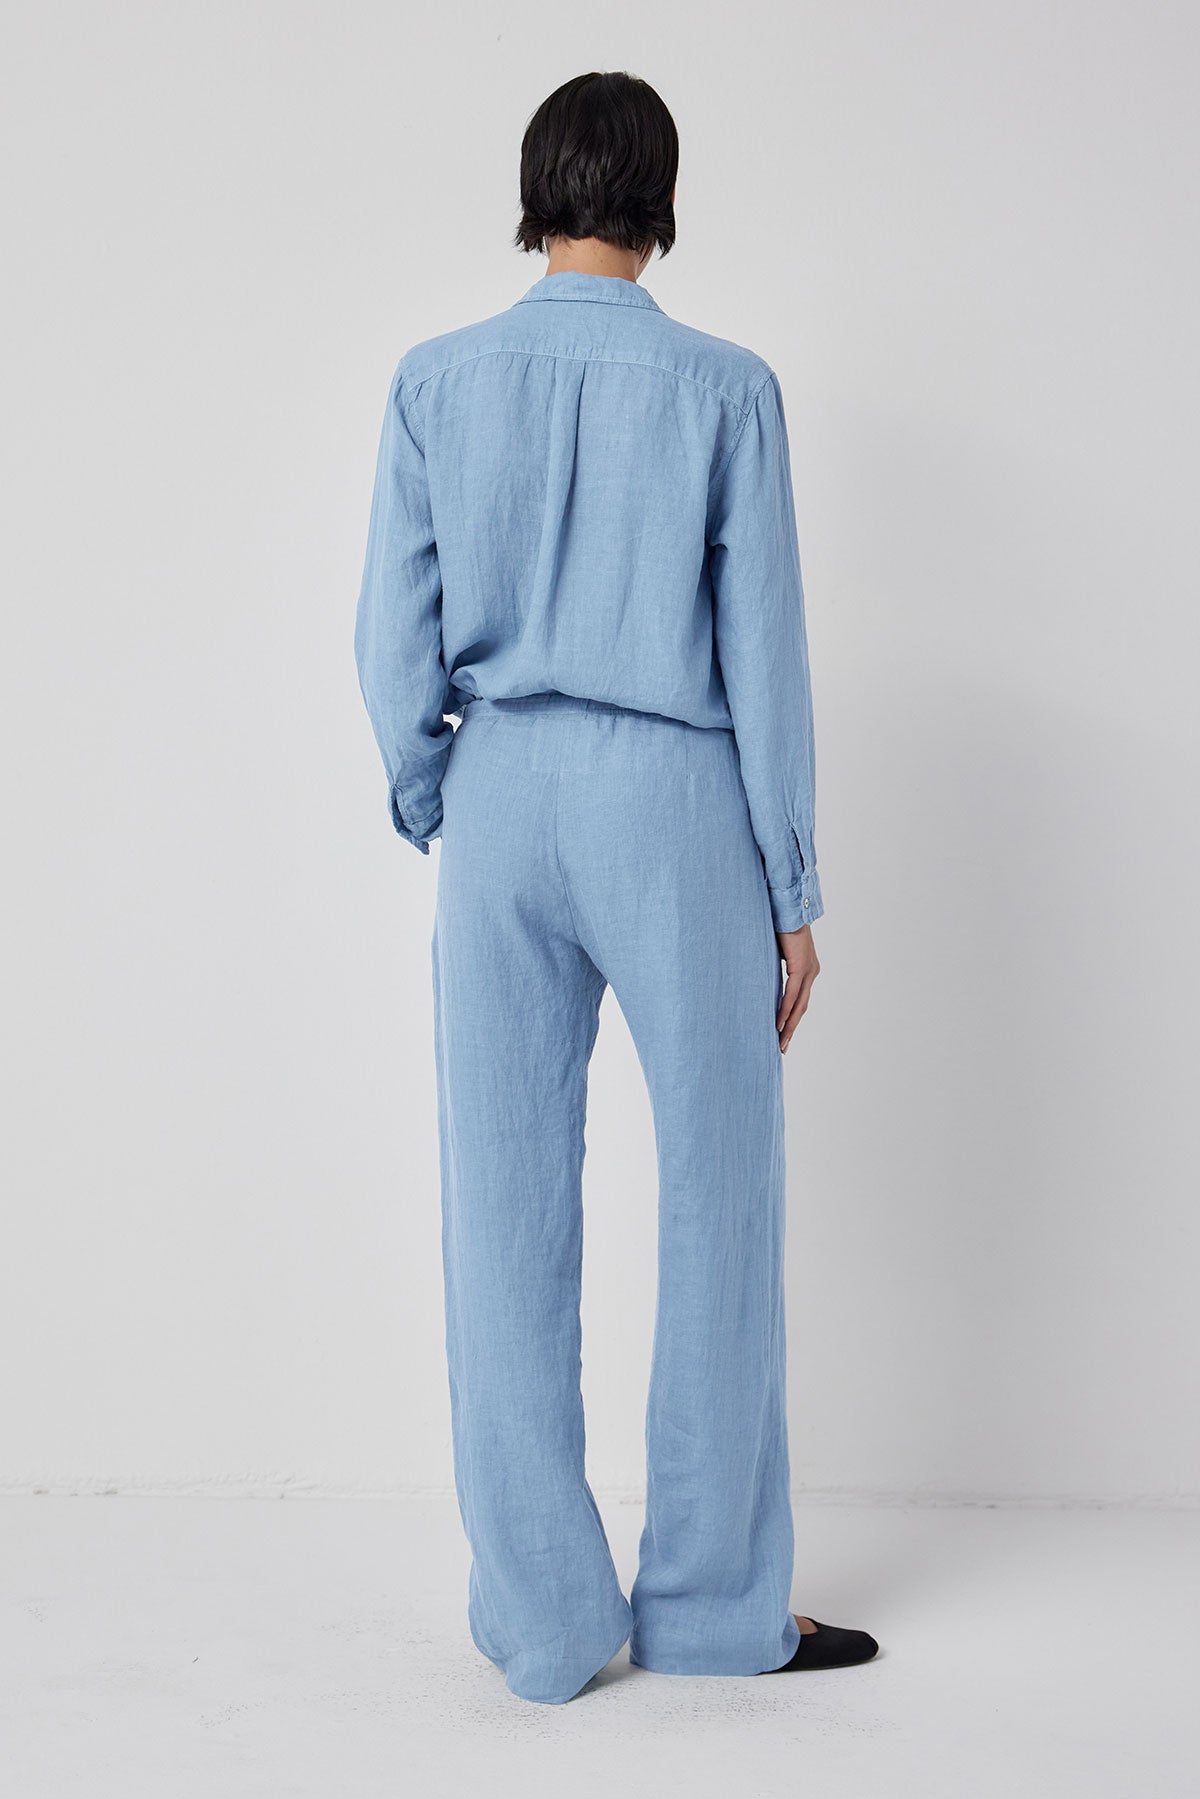 Woman standing with her back to the camera wearing a blue jumpsuit with relaxed fit Pico pants by Velvet by Jenny Graham.-36212497940673